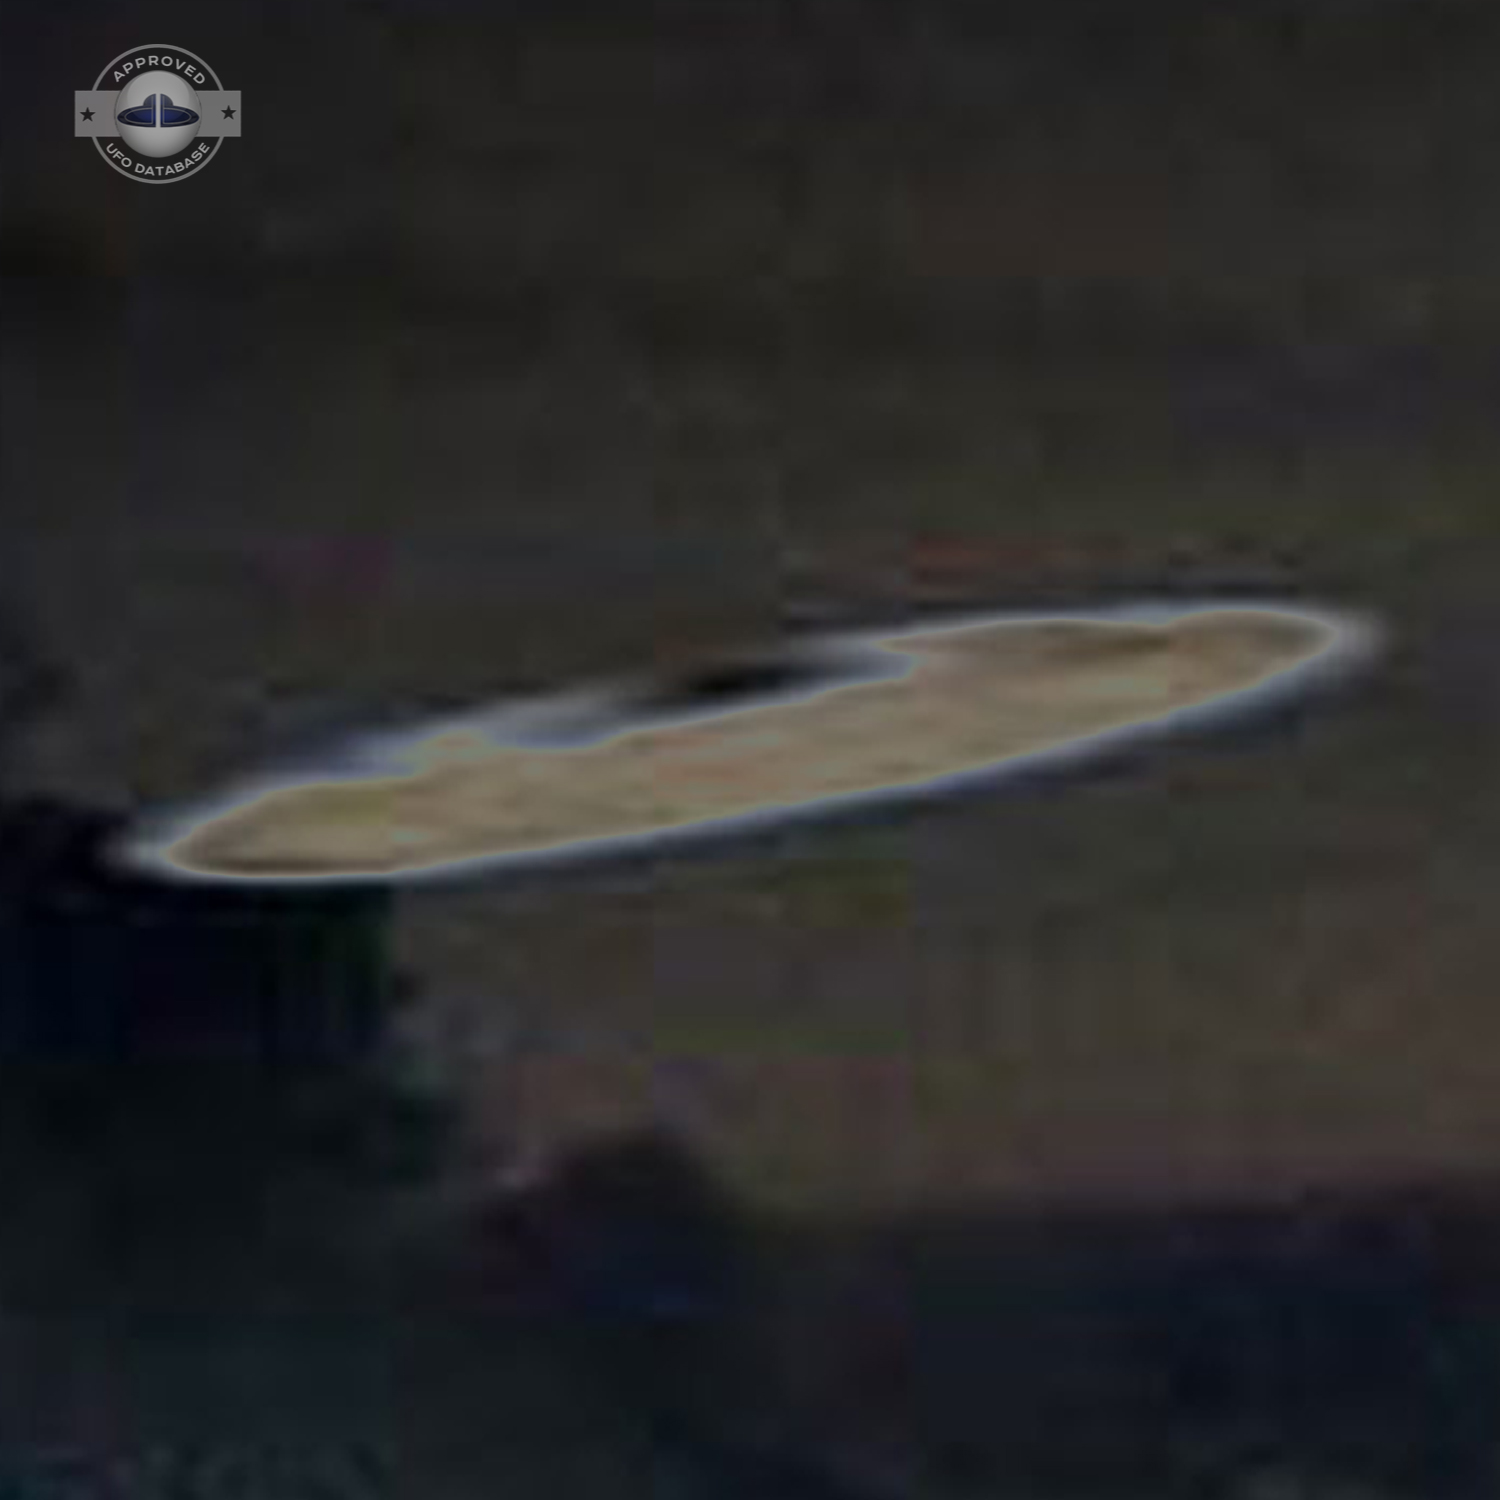 Clean UFO picture UFO disc flying over a lake in Kustavi Finland UFO Picture #56-5